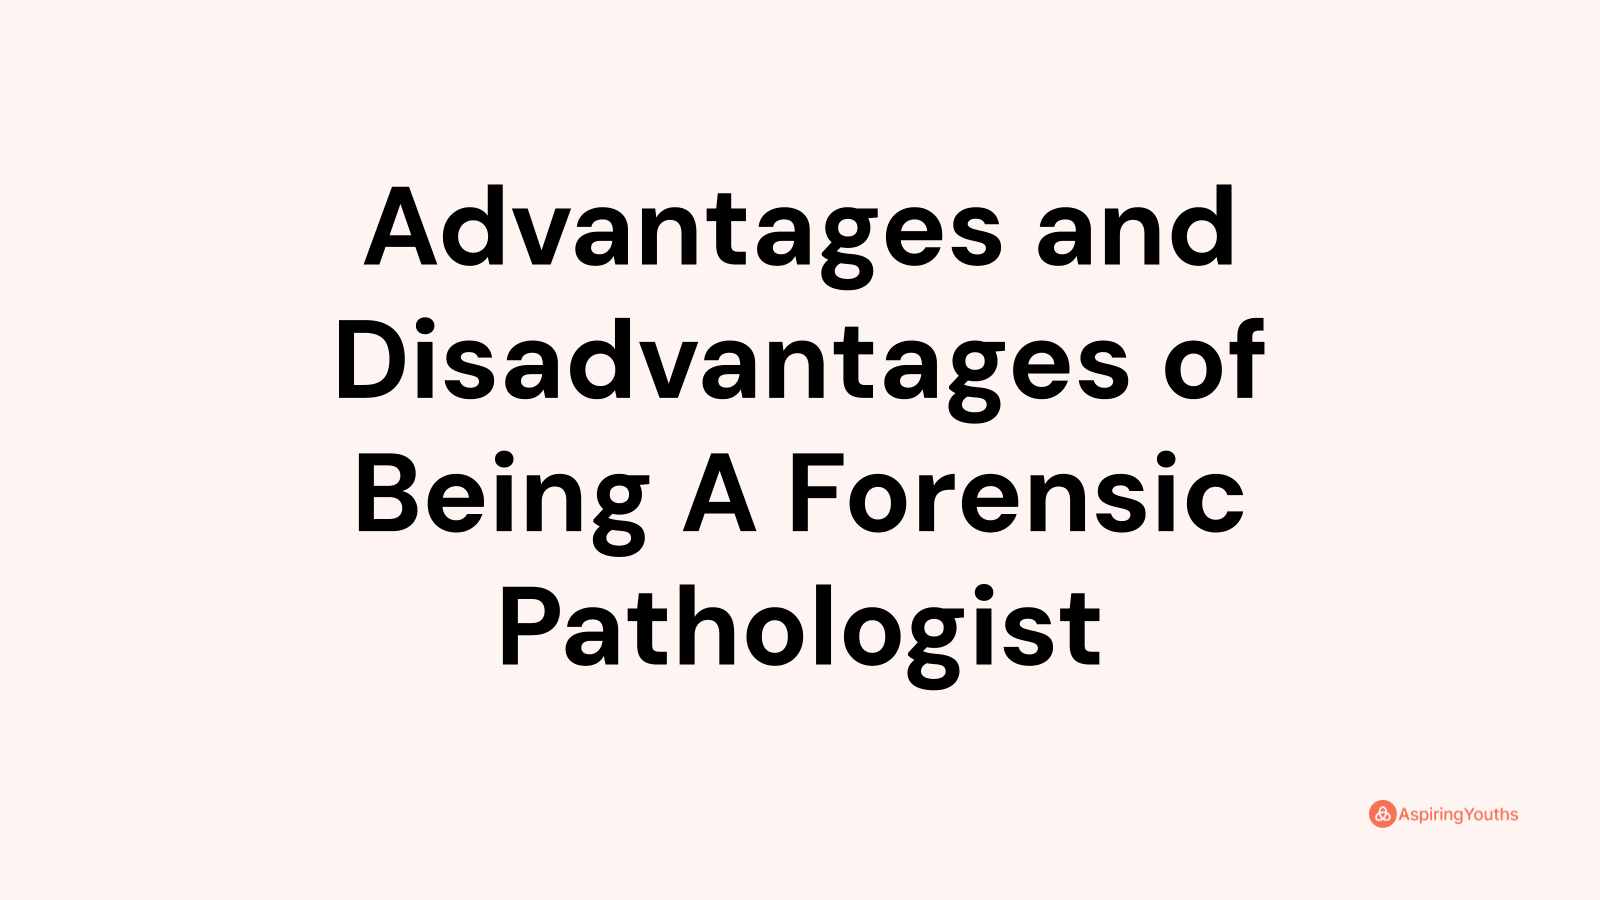 Advantages and disadvantages of Being A Forensic Pathologist